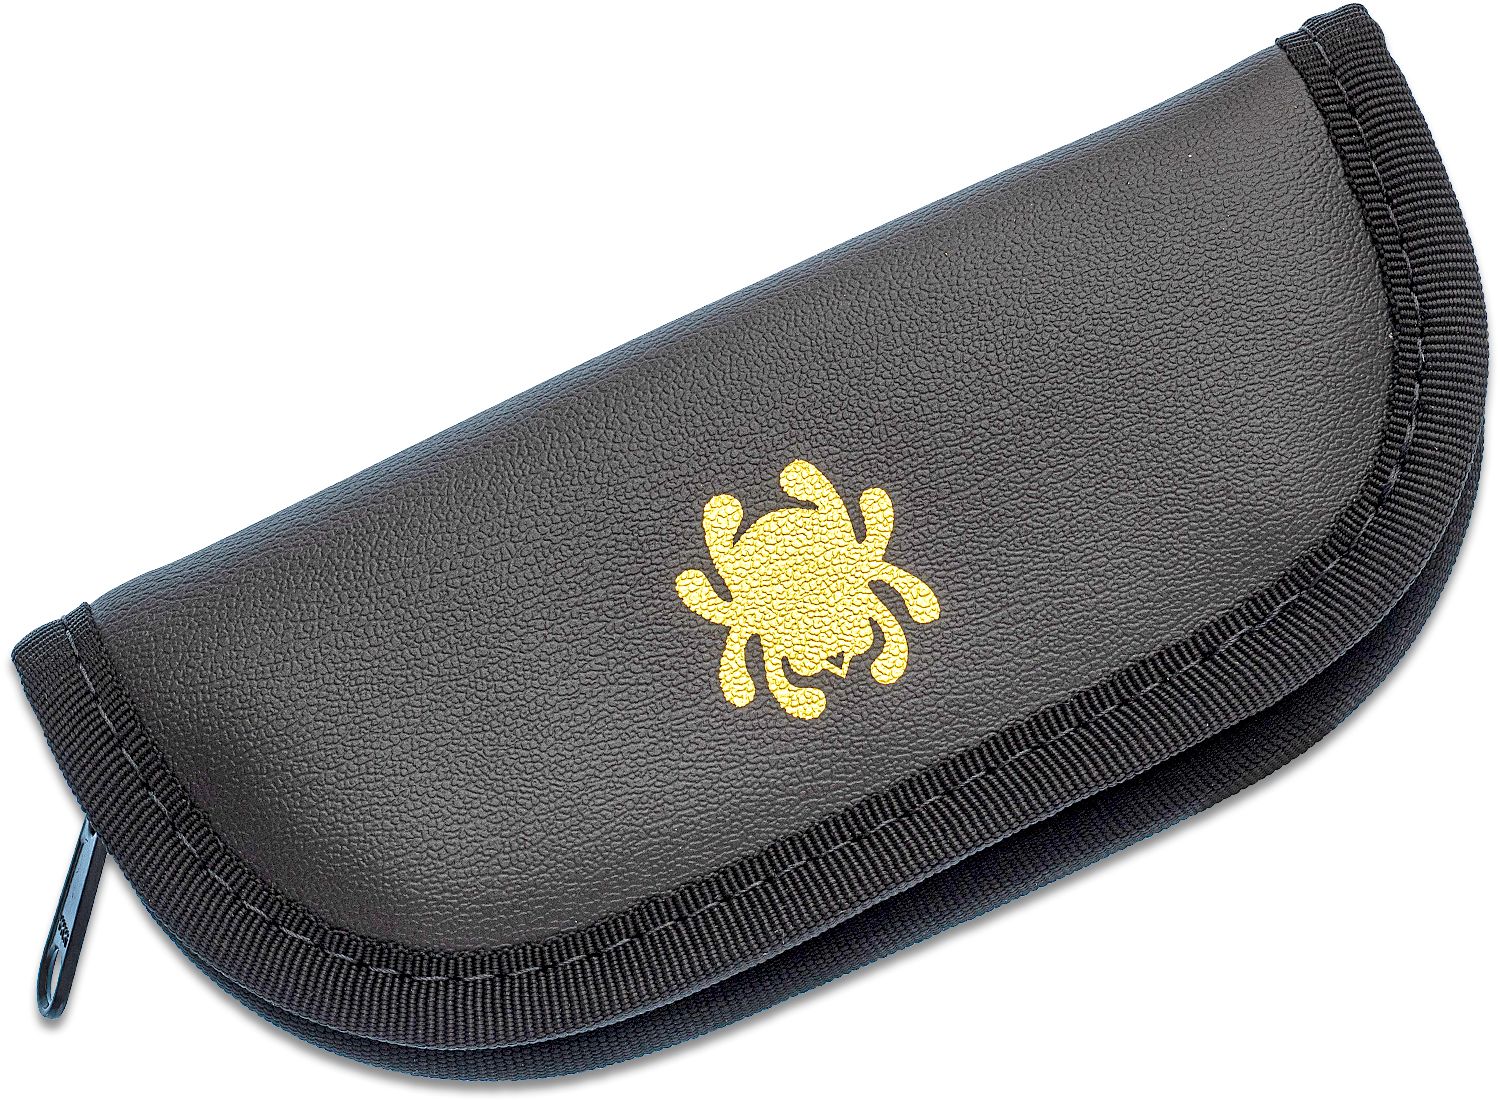 Download Spyderco Large Mock Leather Padded Zipper Pouch, 7" Overall - KnifeCenter - C12C - Discontinued